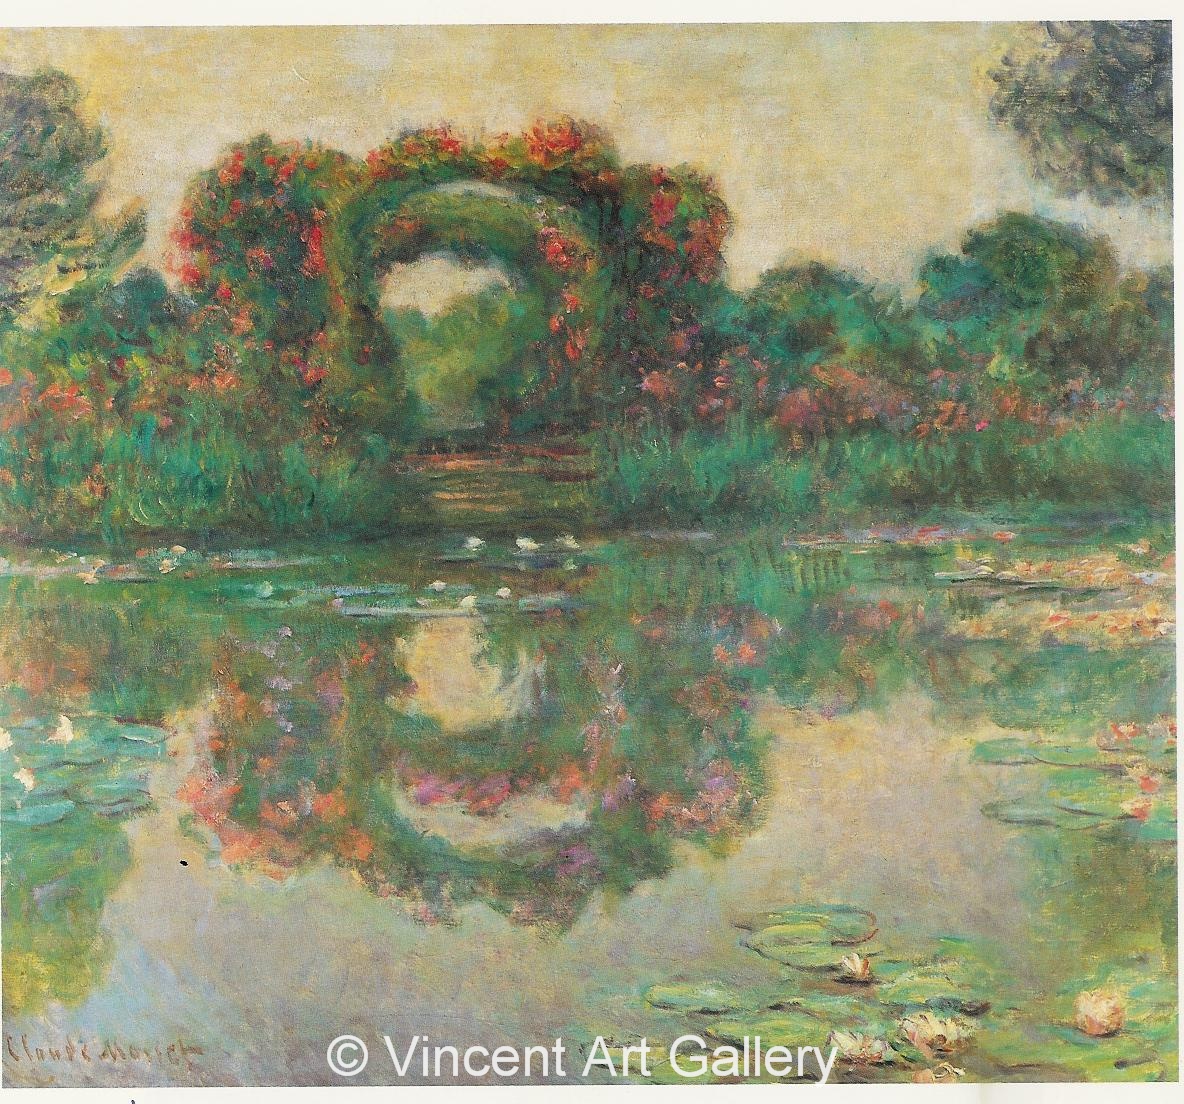 A163, MONET, Gate of Roses in Giverny